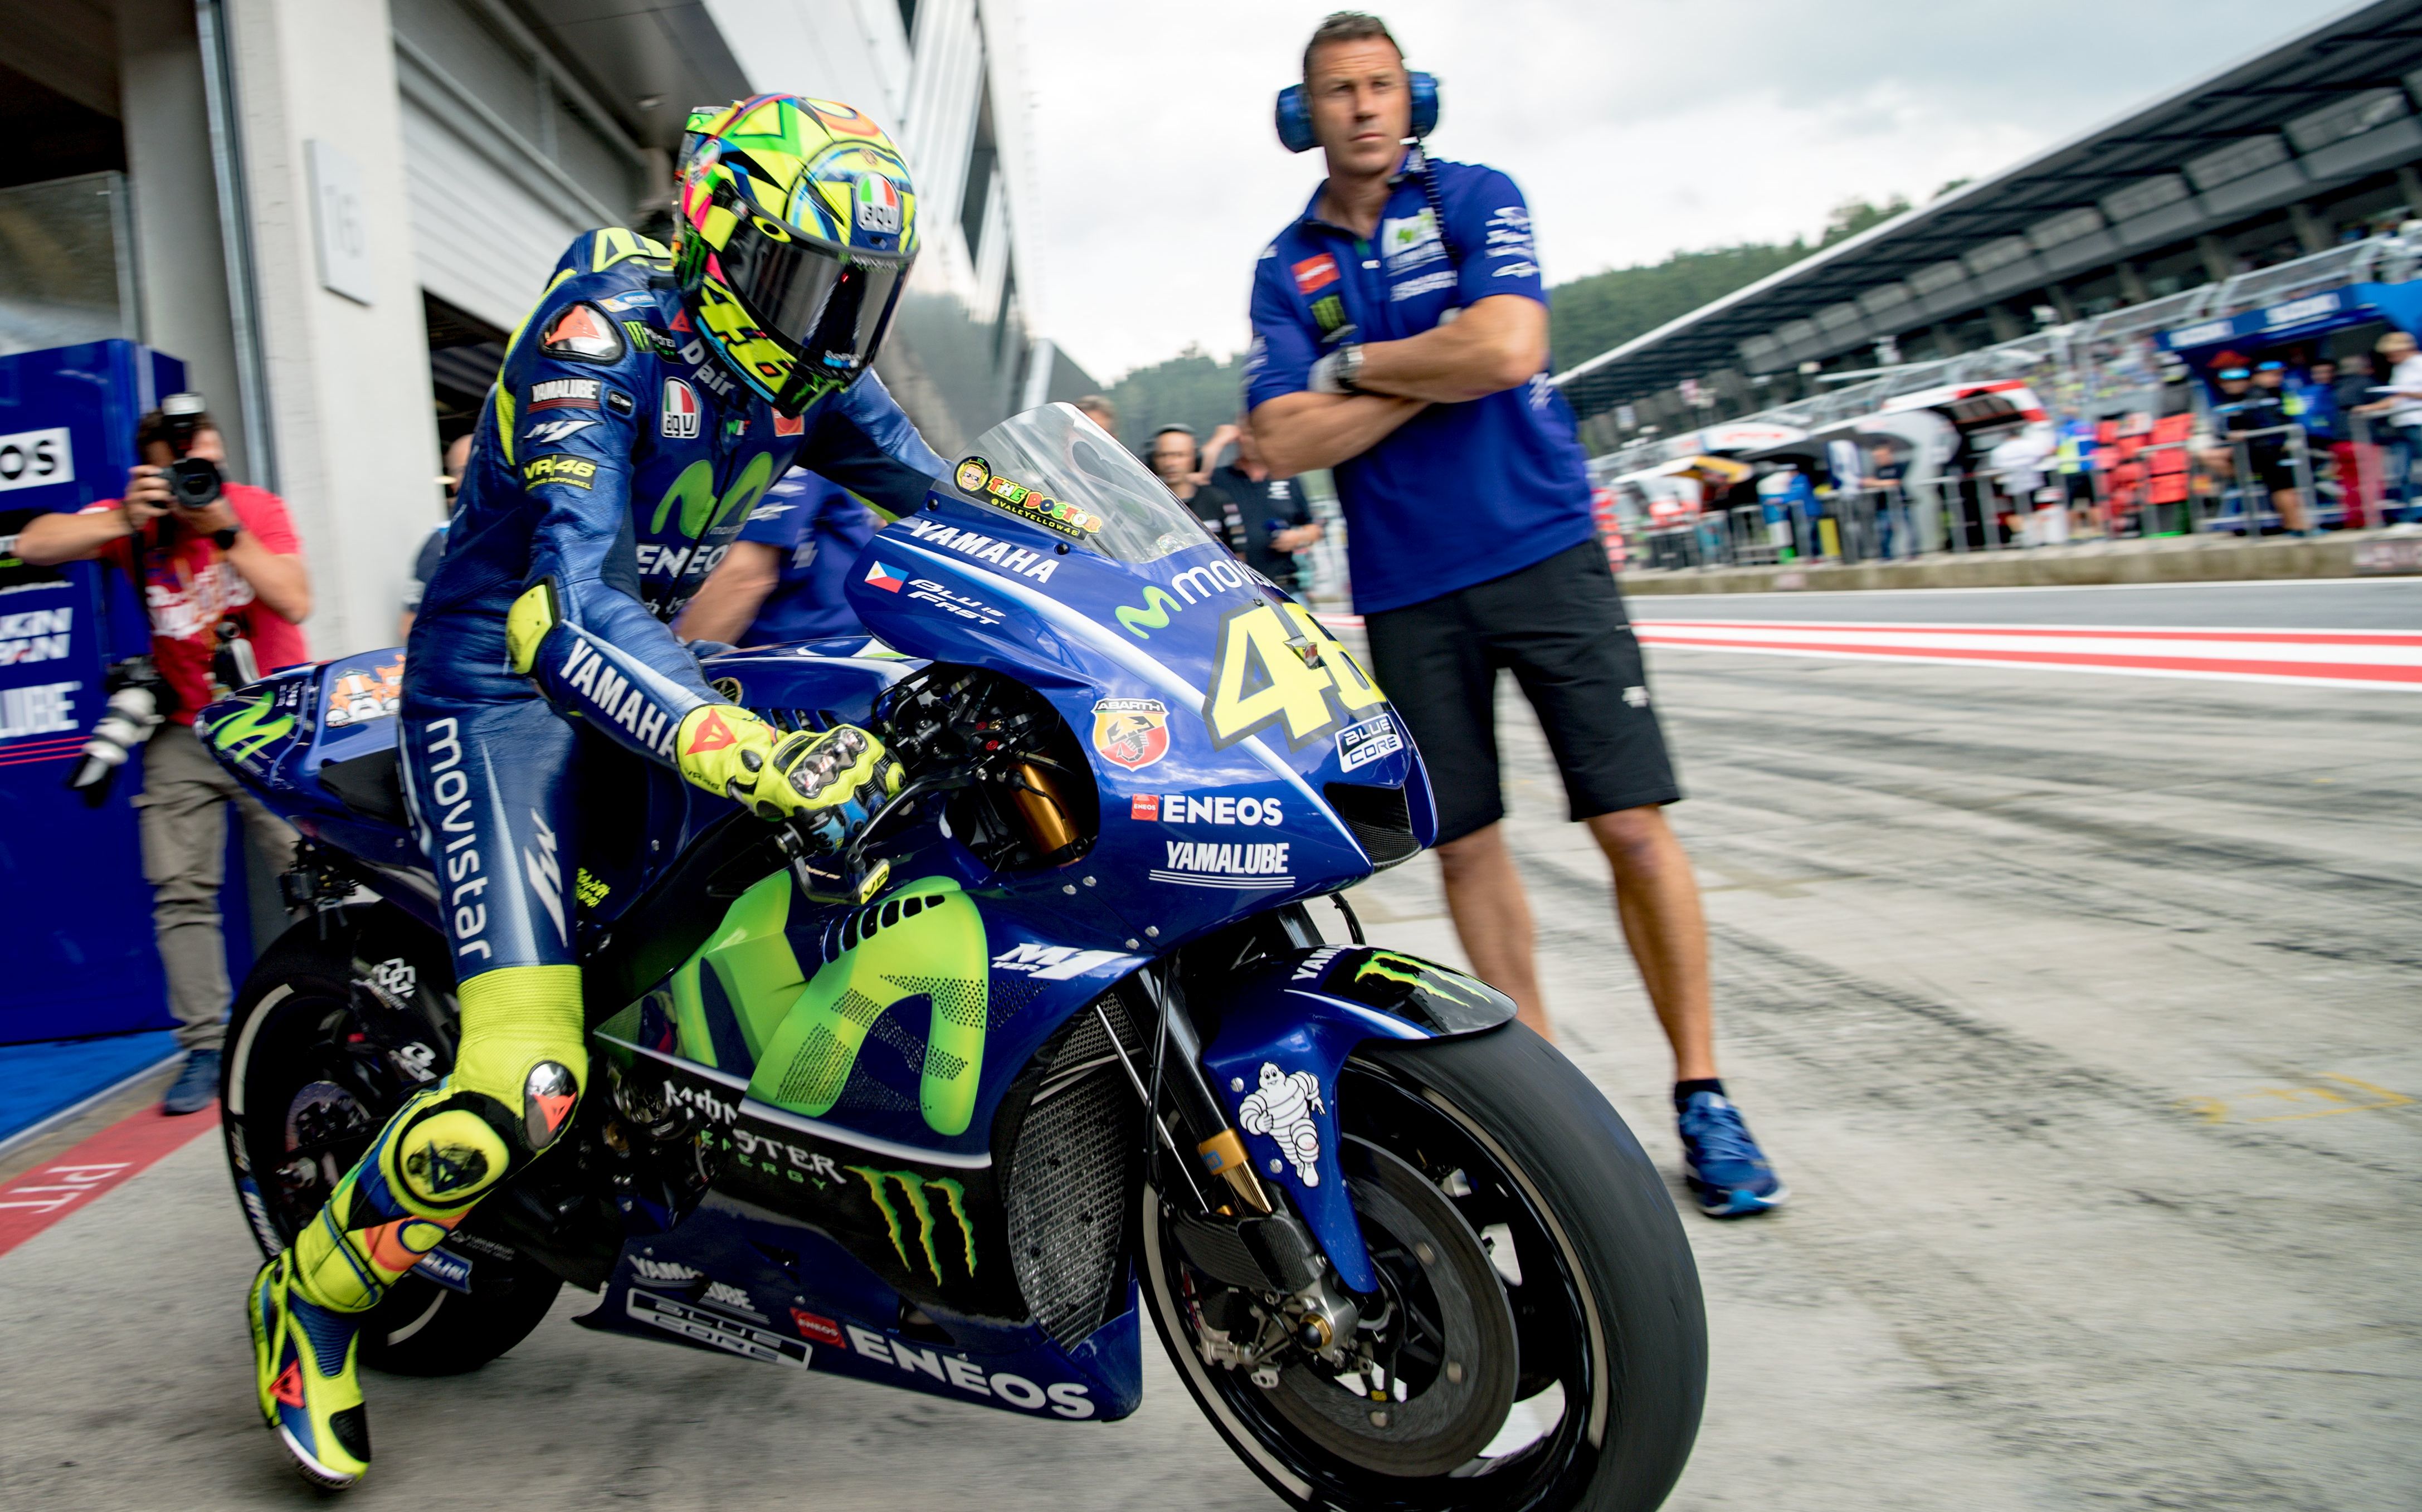 epa06137851 Italian MotoGP rider Valentino Rossi of Movistar Yamaha MotoGP Team leaves the team garage during the second free practice session of the Motorcycling Grand Prix of Austria at the Spielberg Ring in Spielberg, Austria, 11 August 2017. The Austrian MotoGP race will take place on 13 August 2017.  EPA/CHRISTIAN BRUNA